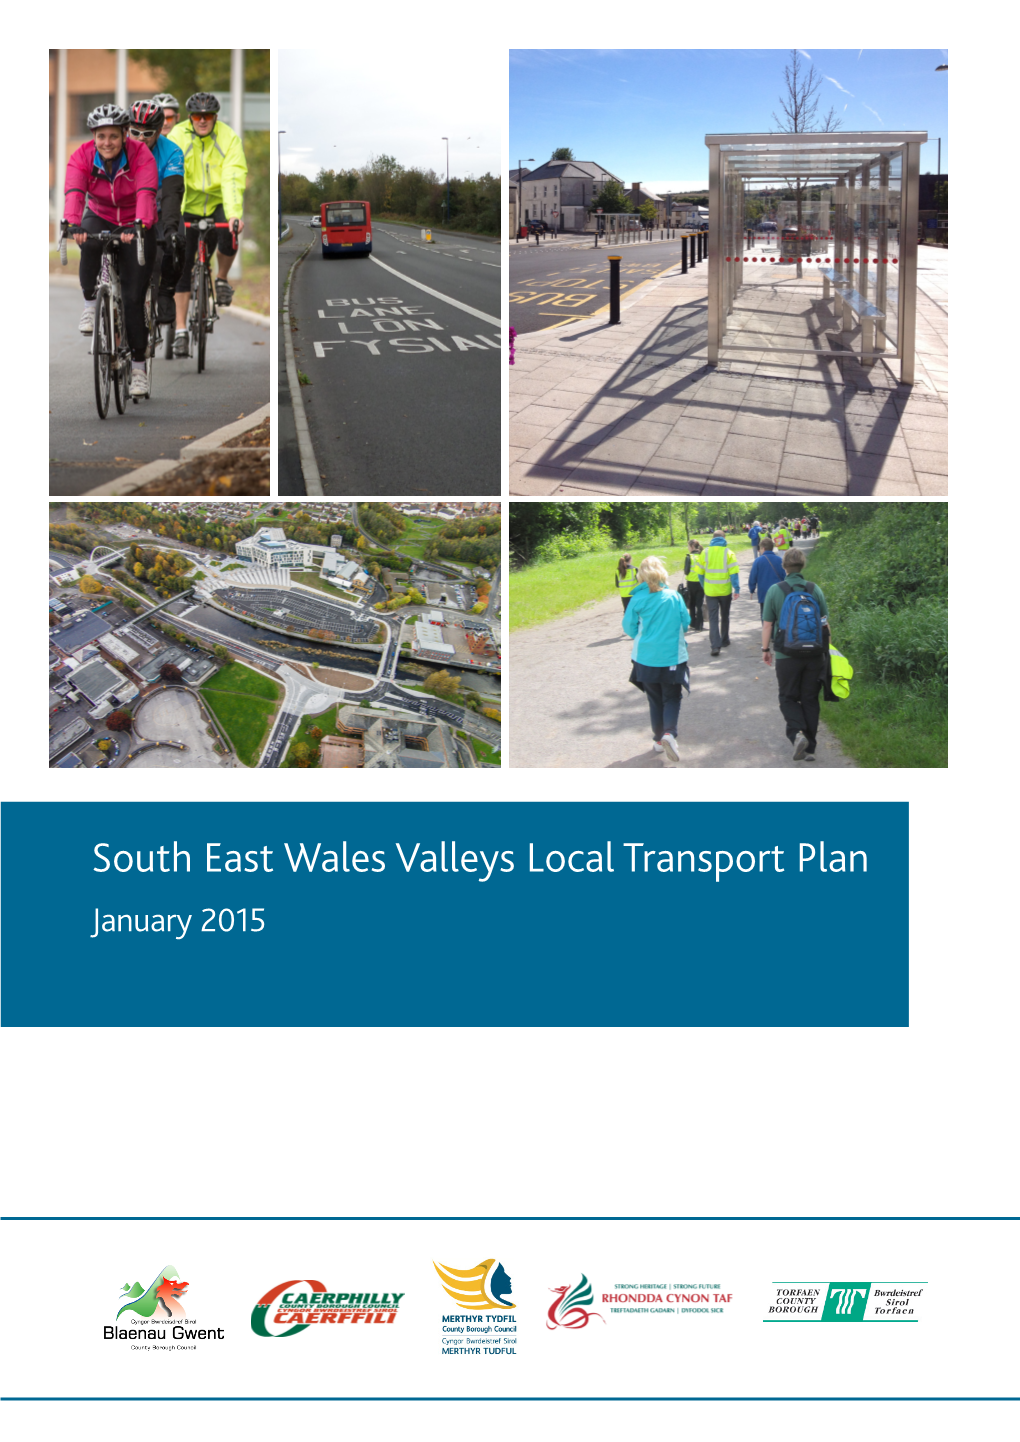 South East Wales Valleys Local Transport Plan January 2015 South East Wales Valleys Local Transport Plan